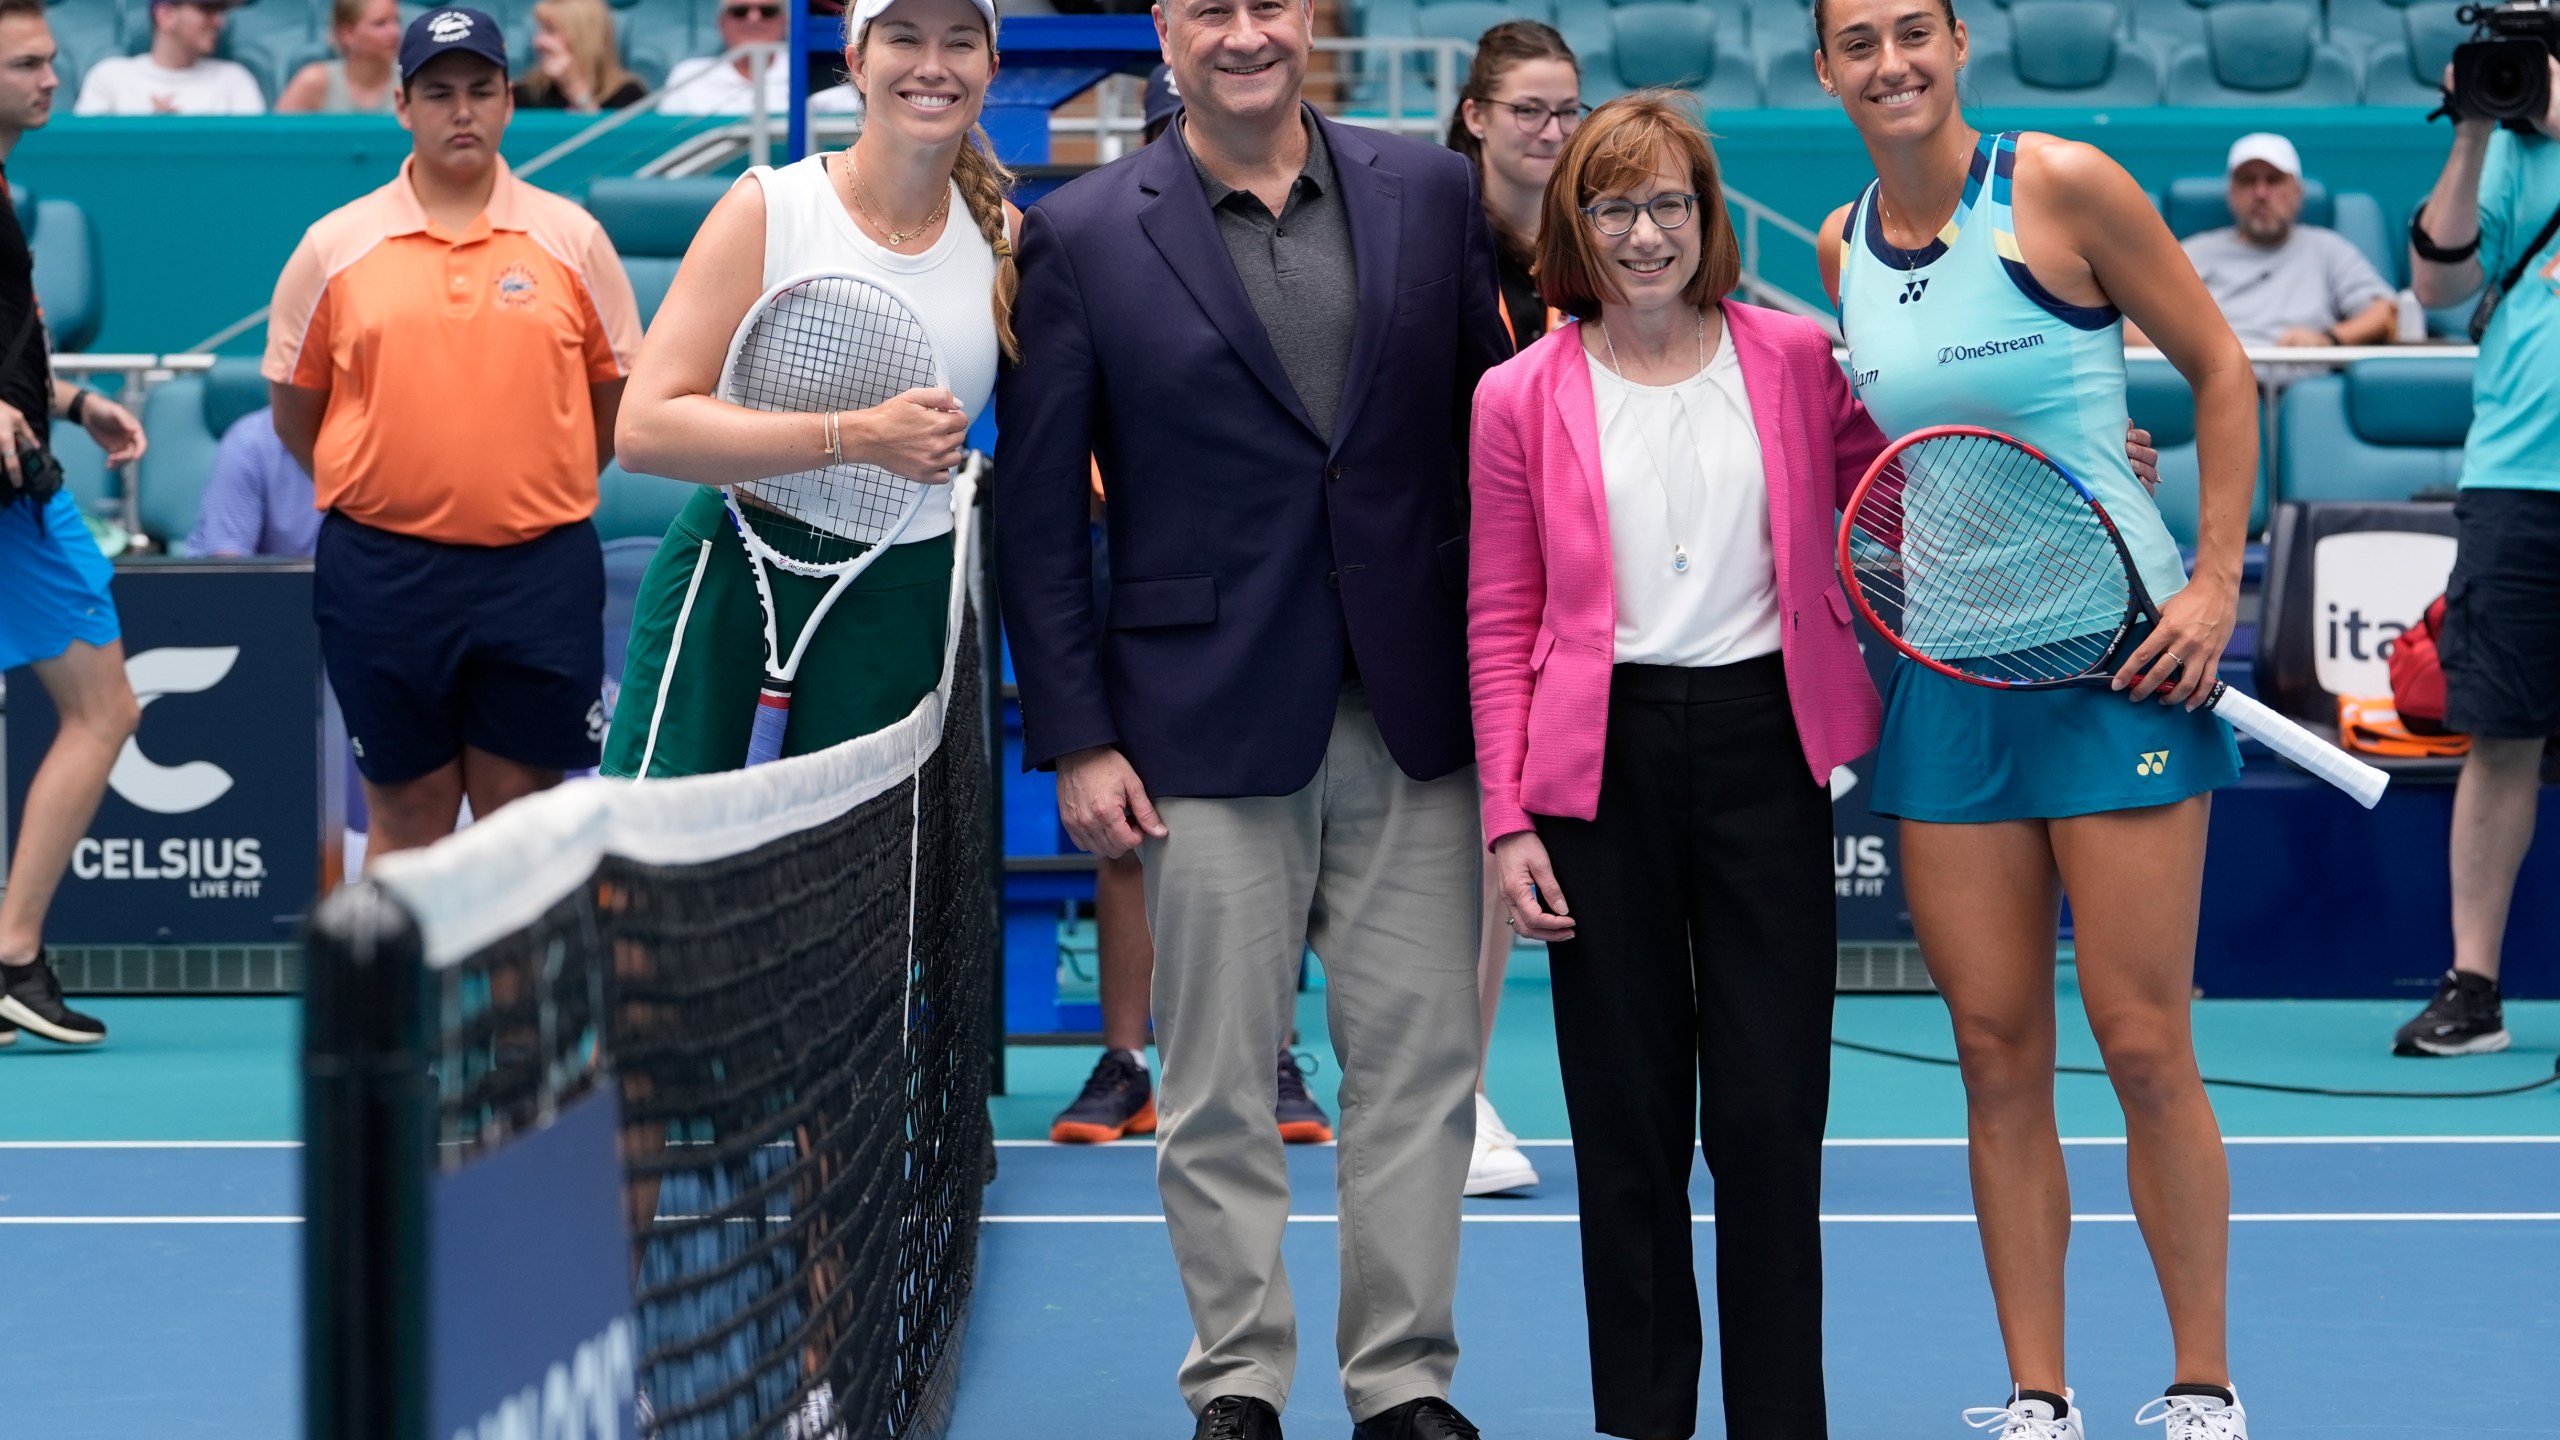 Second Gentleman Douglas Emhoff, center, poses with Danielle Collins, left, and Caroline Garcia, of France, right, before their match during the Miami Open tennis tournament, Wednesday, March 27, 2024, in Miami Gardens, Fla. Second from right is Cindy Long, administrator with the USDA. (AP Photo/Lynne Sladky)